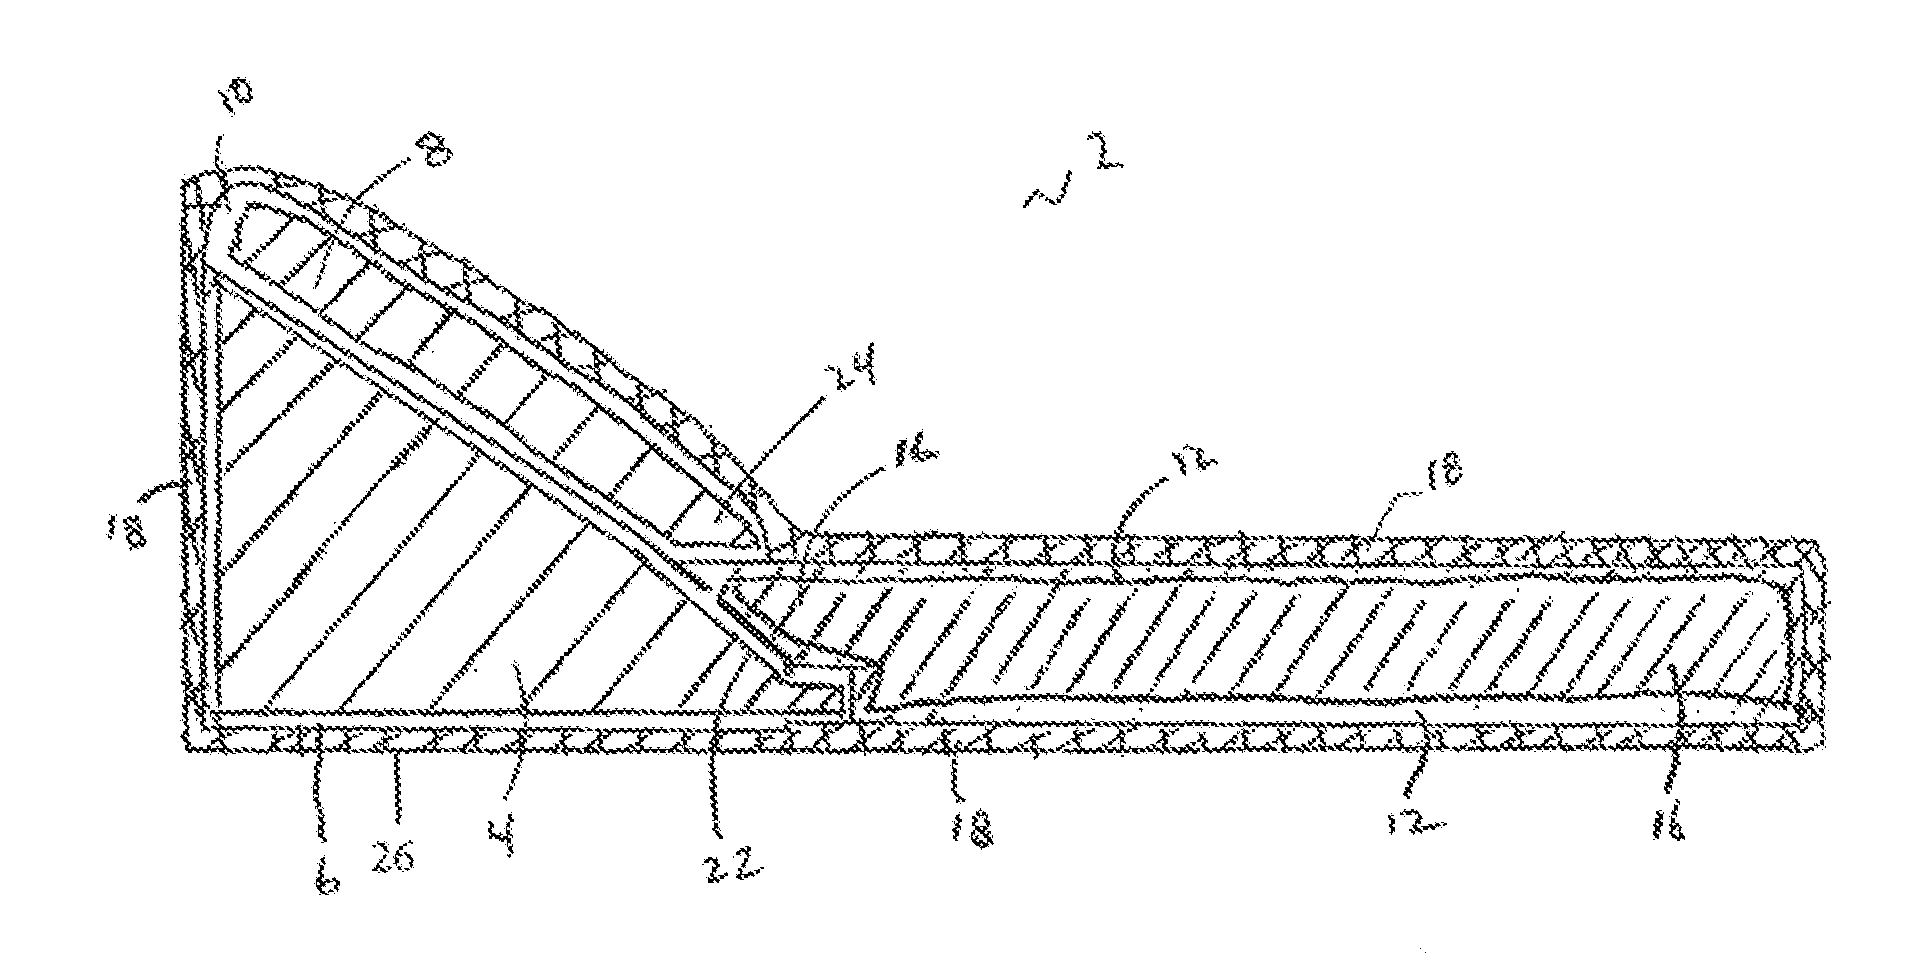 Inclined body positioning and support system